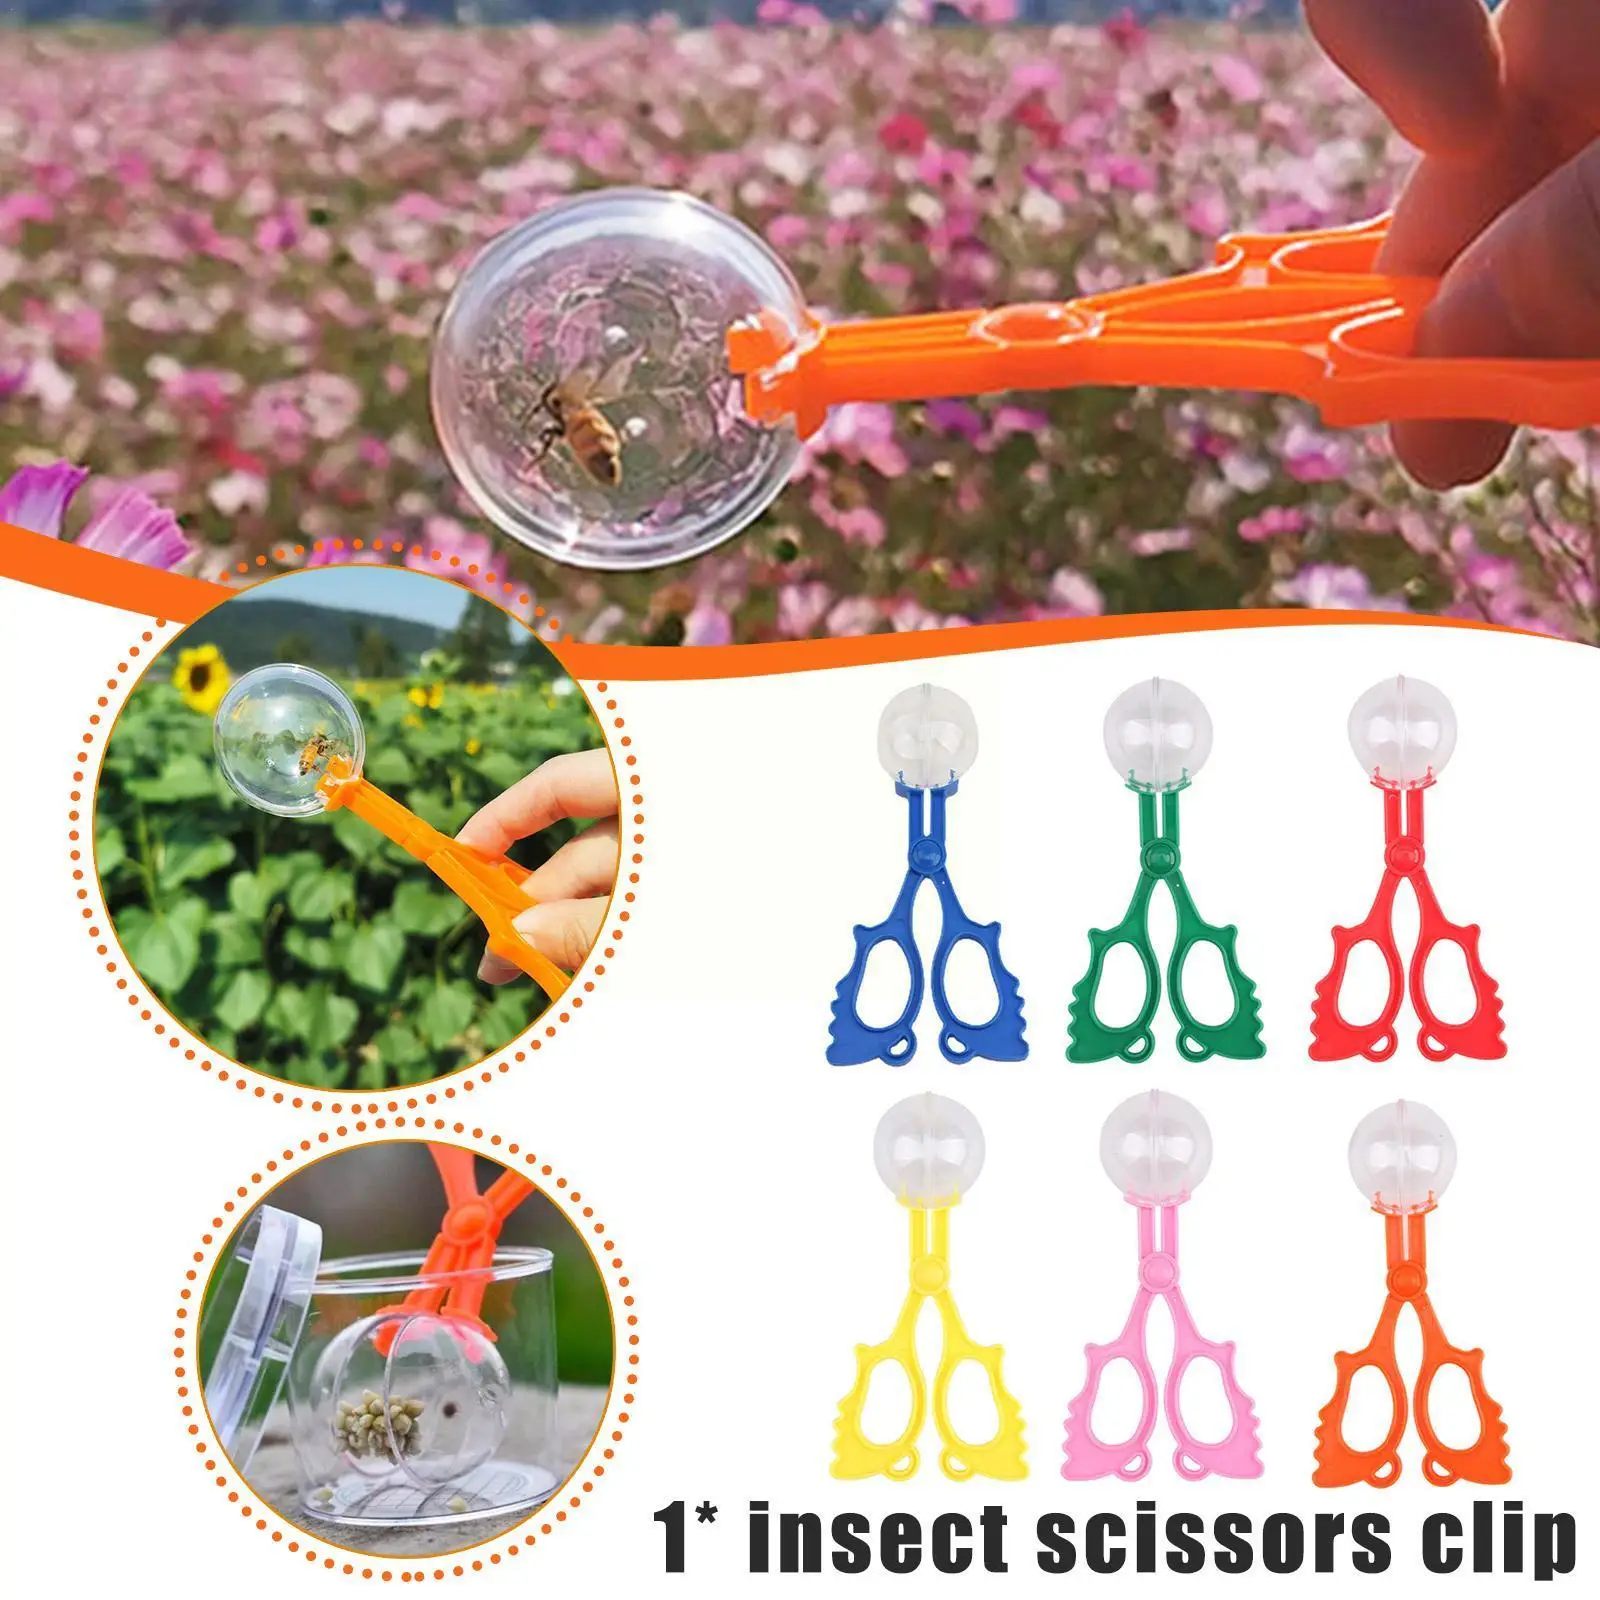 1PC Colorful Insect Catcher Handy Scoopers Plastic Bug Catcher Insects Scissors Outdoor Toys For Kids Children U8R3